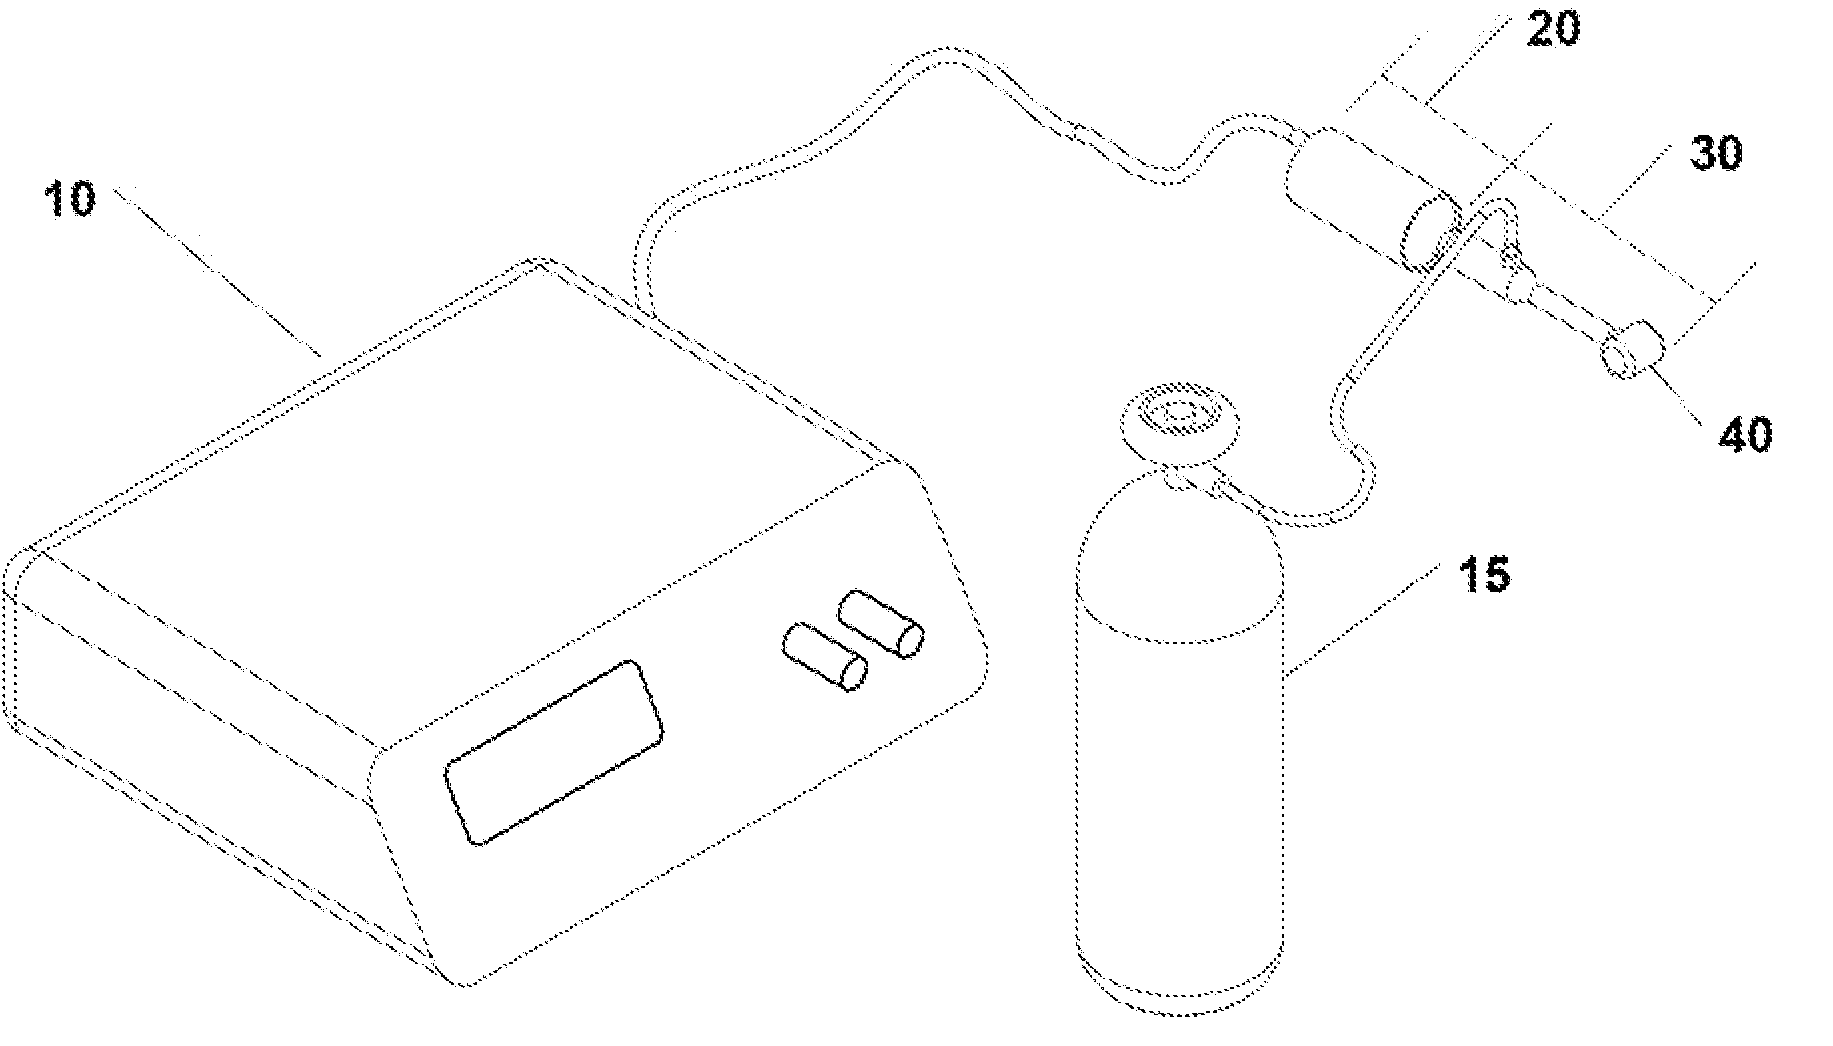 Ultrasound assisted tissue welding device